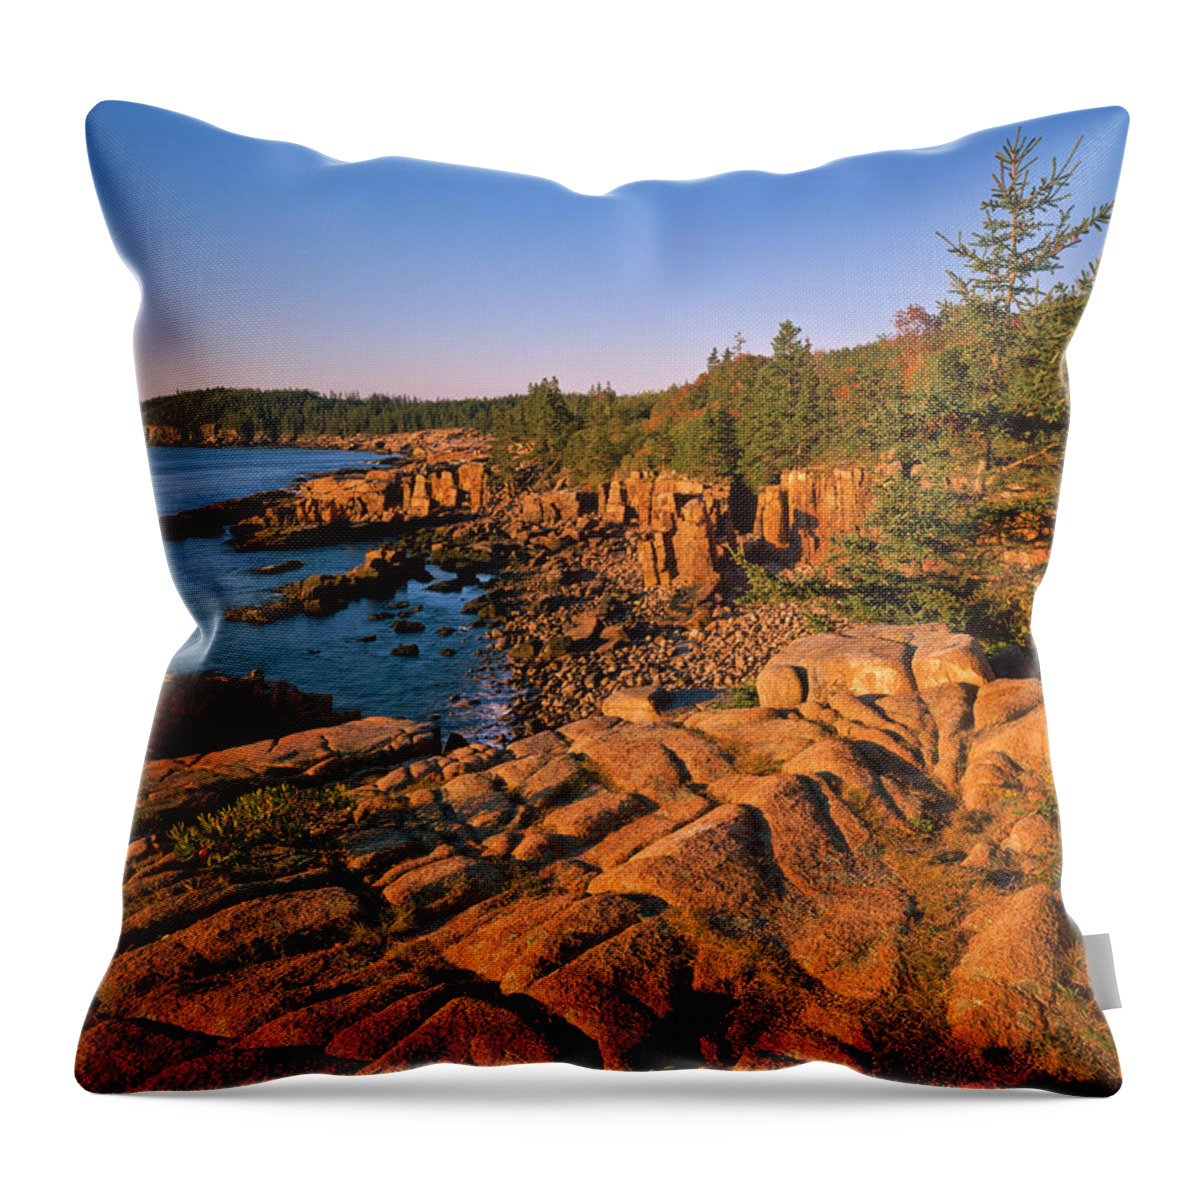 Water's Edge Throw Pillow featuring the photograph Maine Coastline- P by Ron thomas